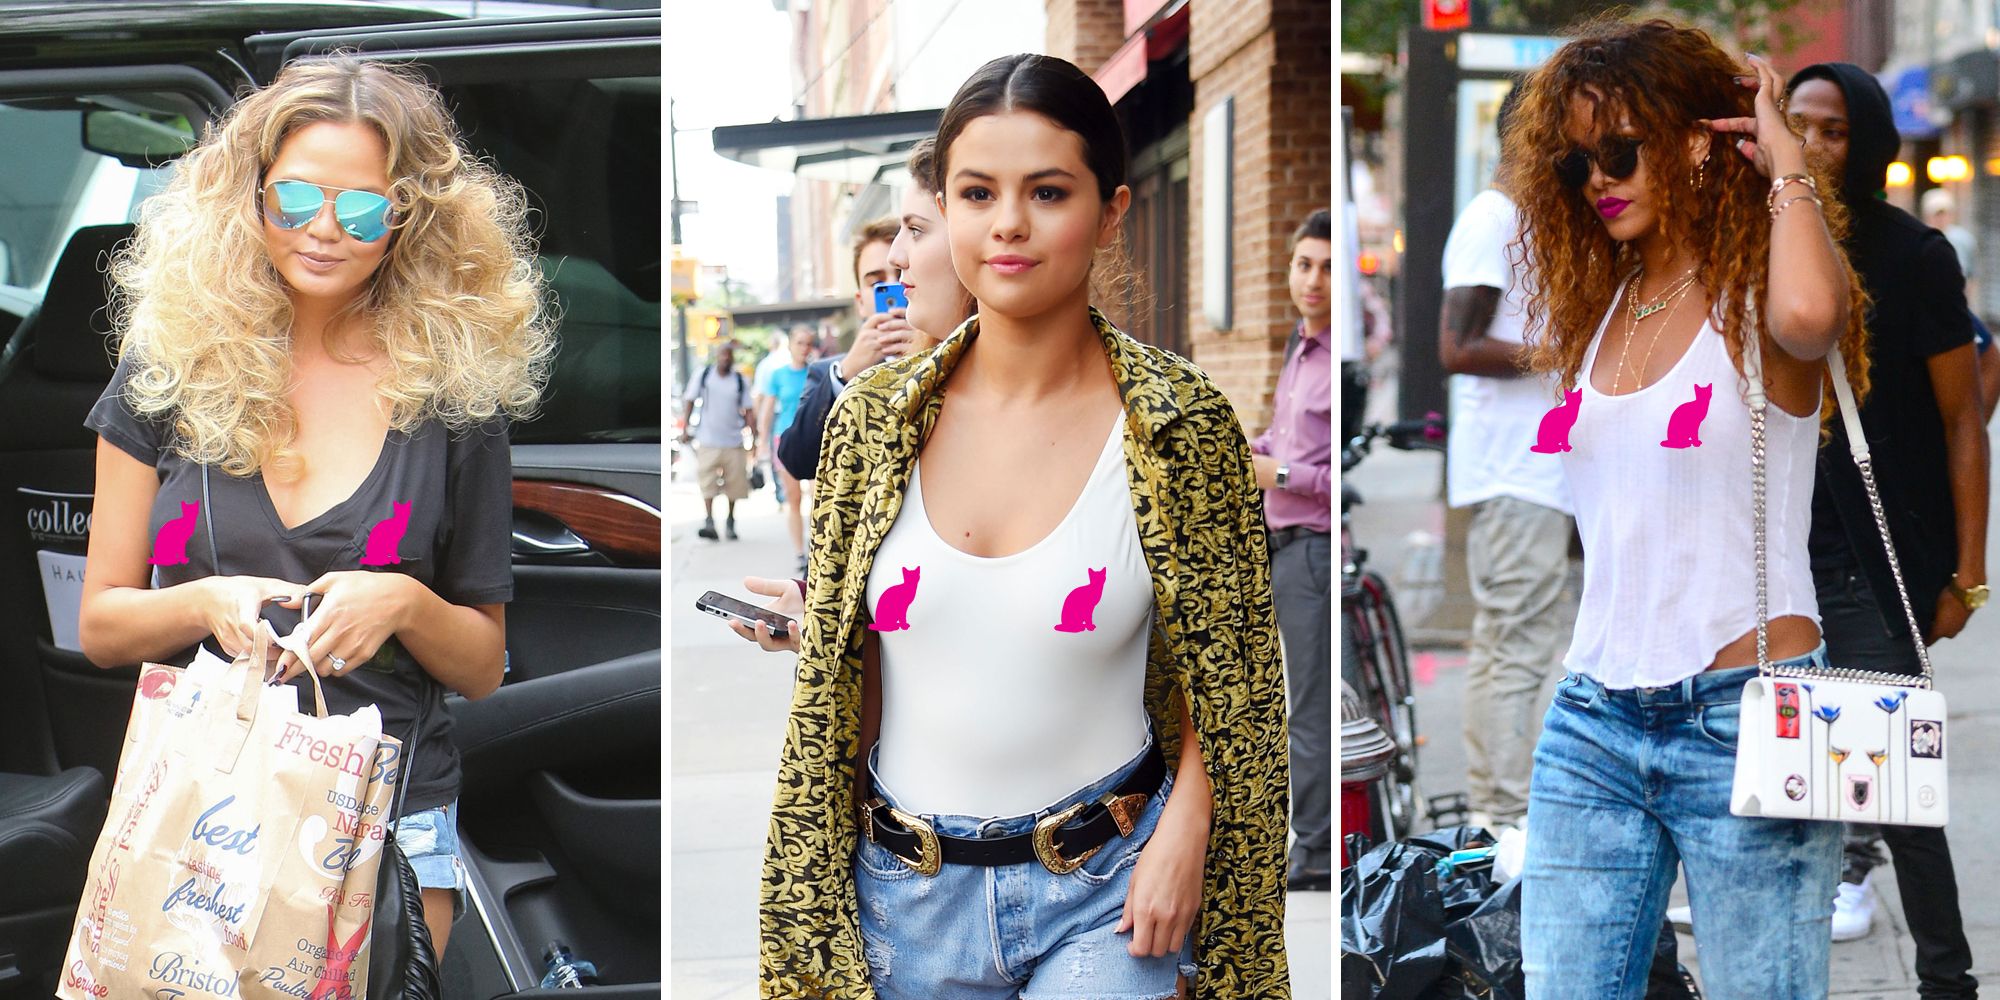 20 Great Ways to Rock A Braless Look - How to go Braless